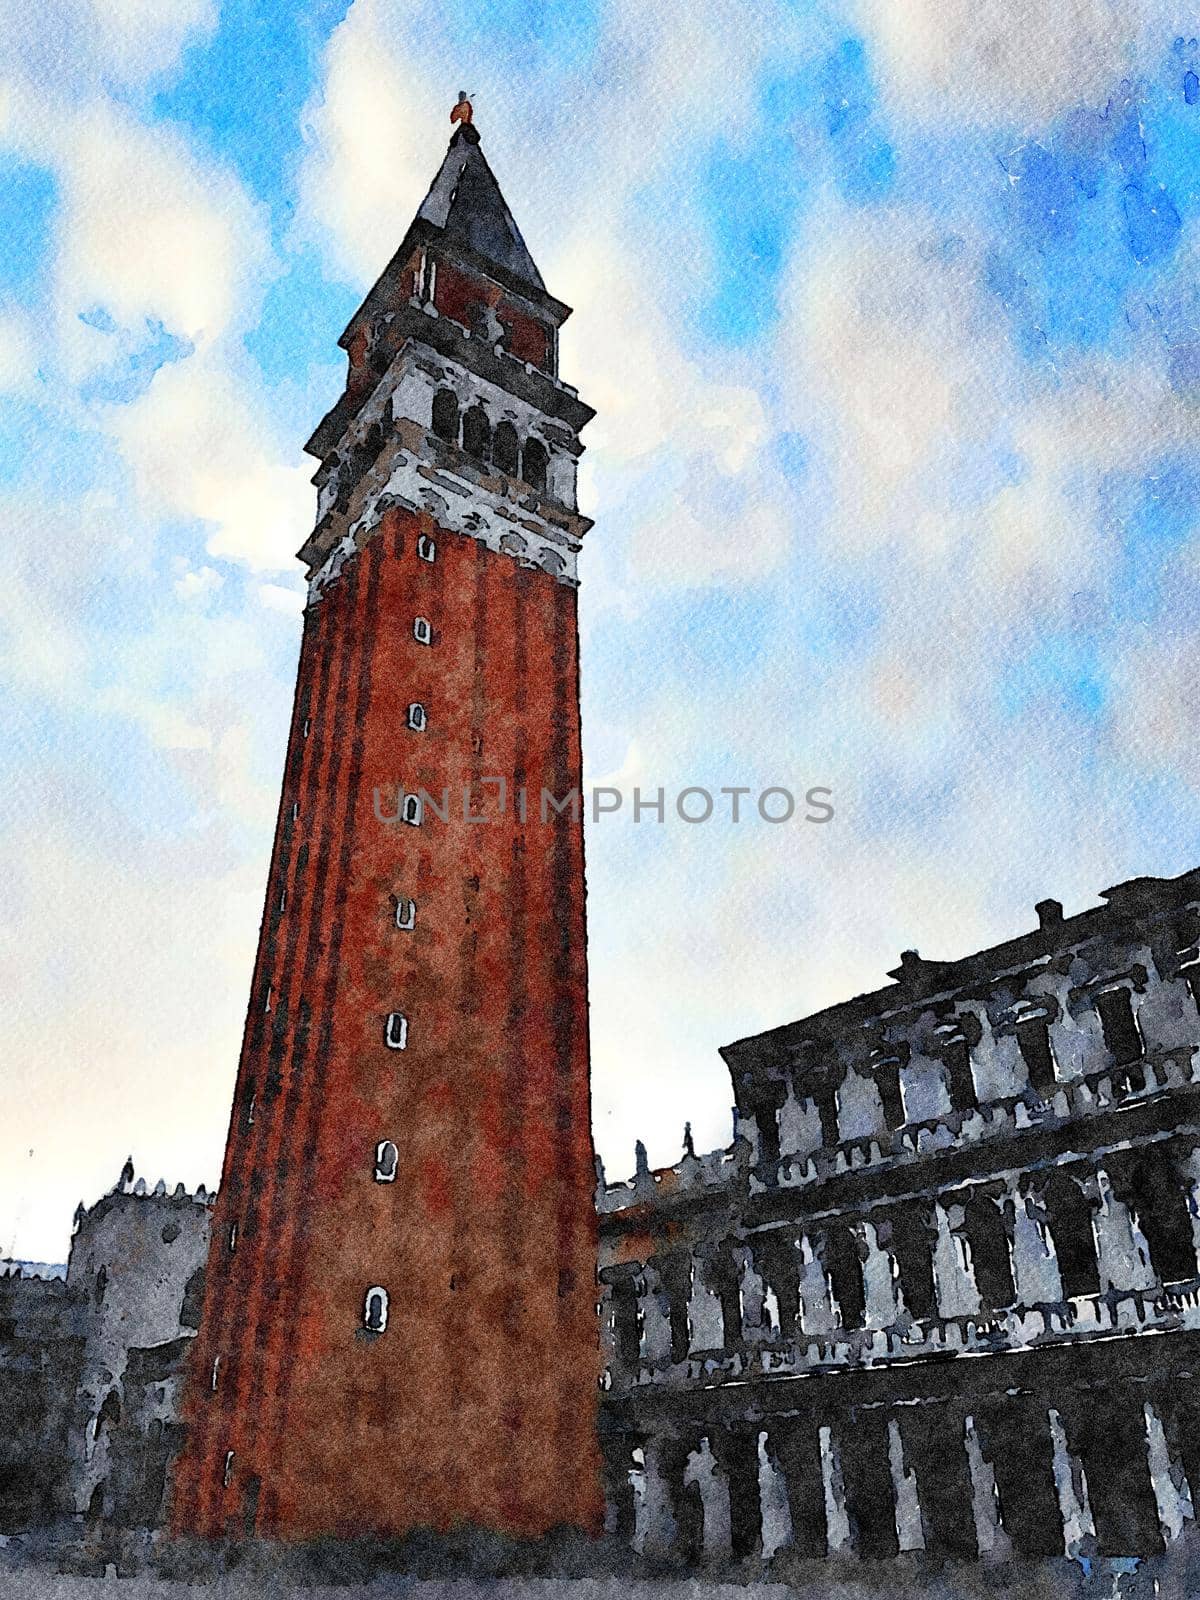 Watercolor which represents the main tower in San Marco square in Venice